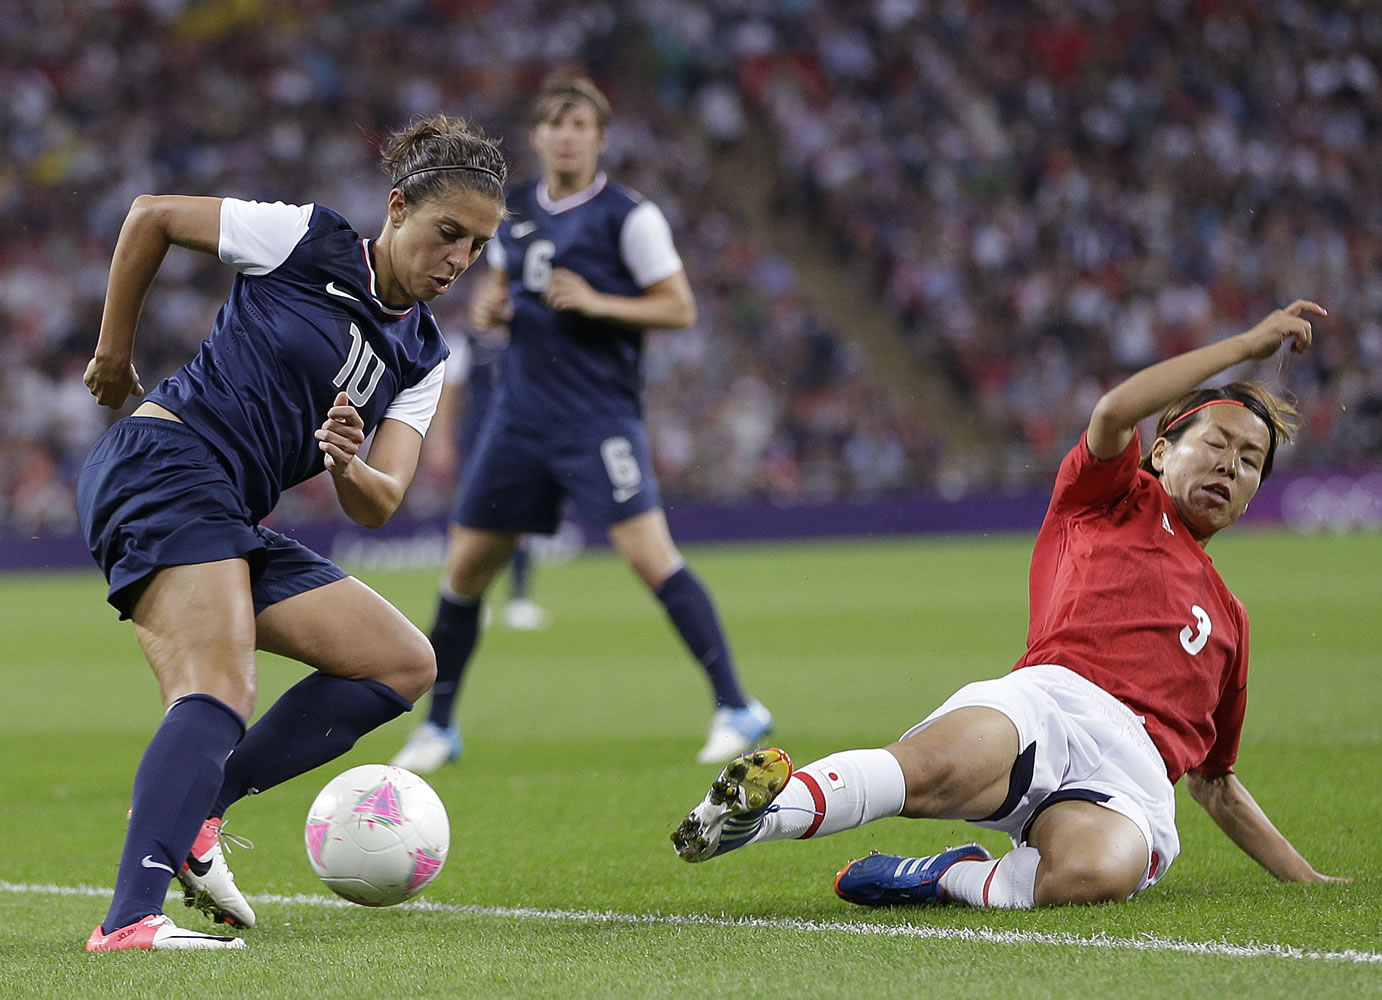 United States' Carli Lloyd (10) and Japan's Azusa Iwashimizu (3) fight for control of the ball during the women's soccer gold medal match at the 2012 Summer Olympics in London.